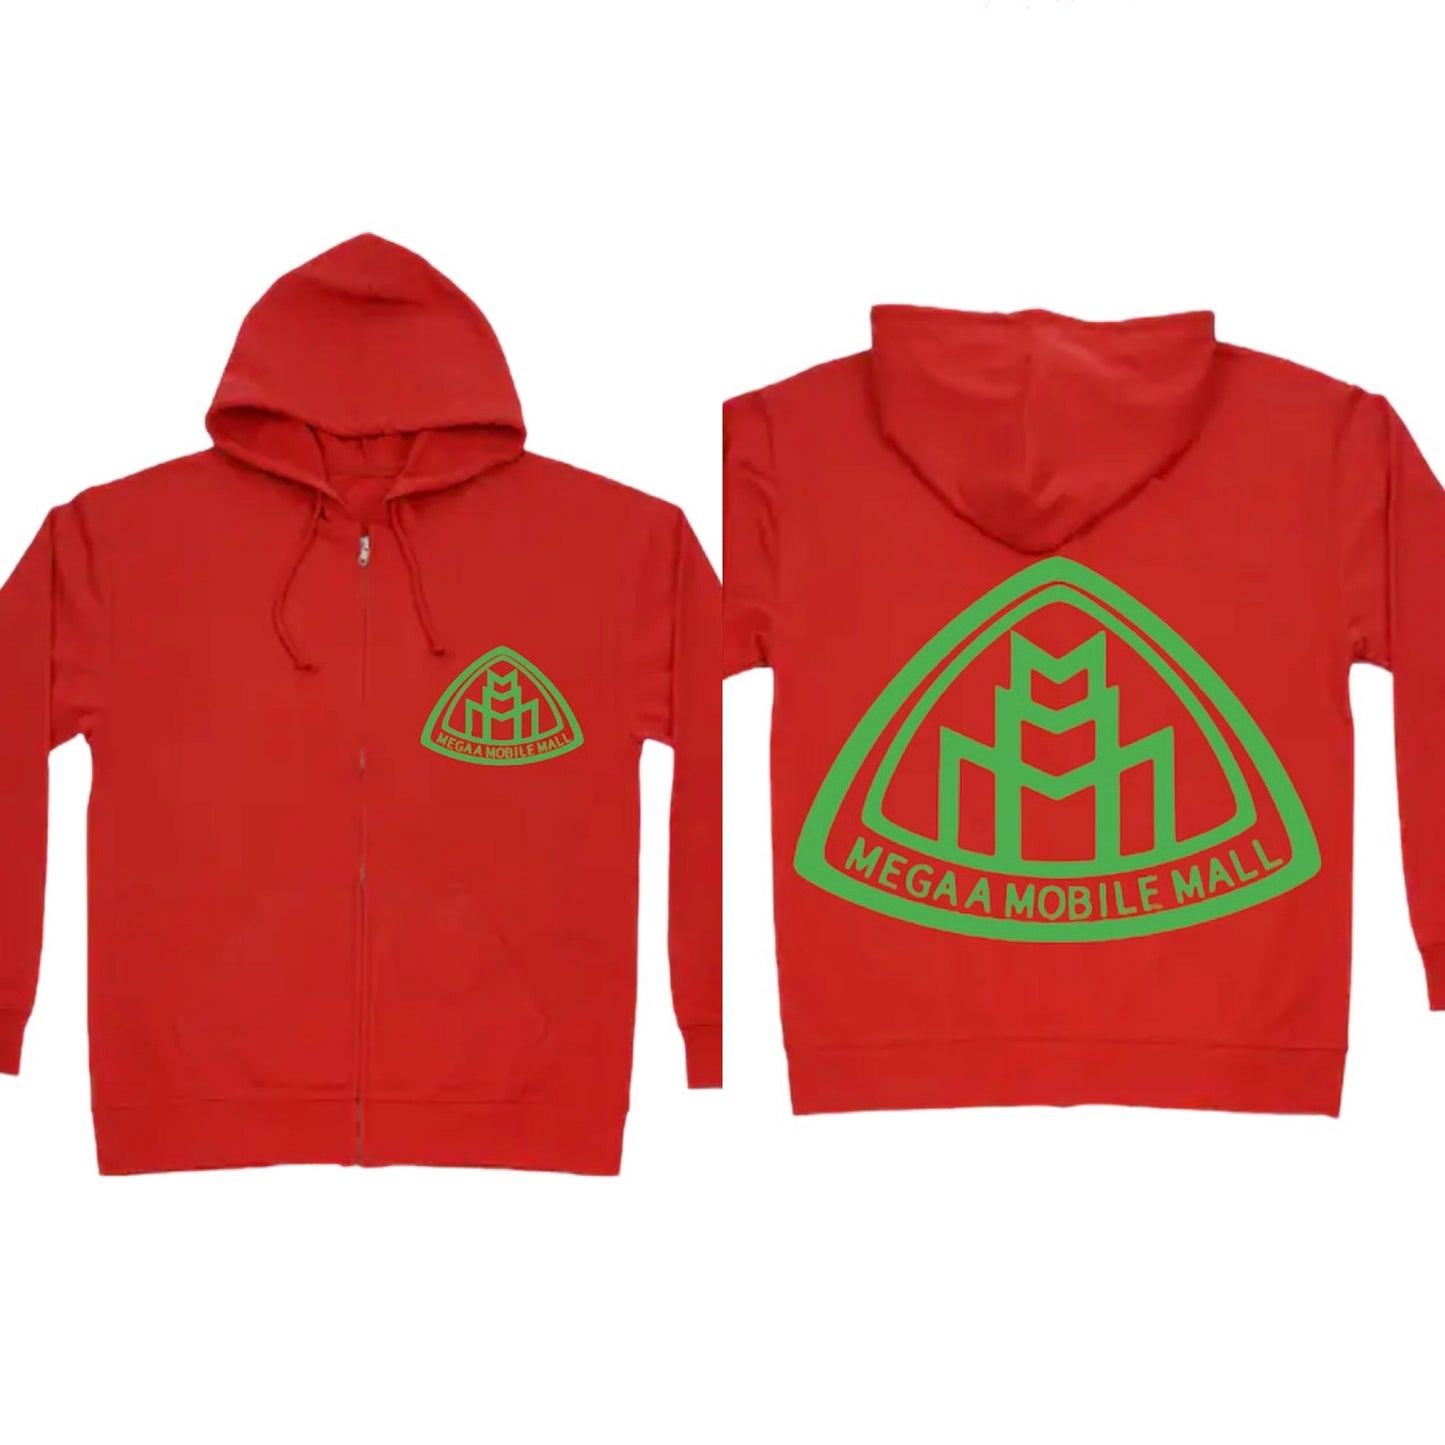 megaamobilemall red zip up hoodie with green logo